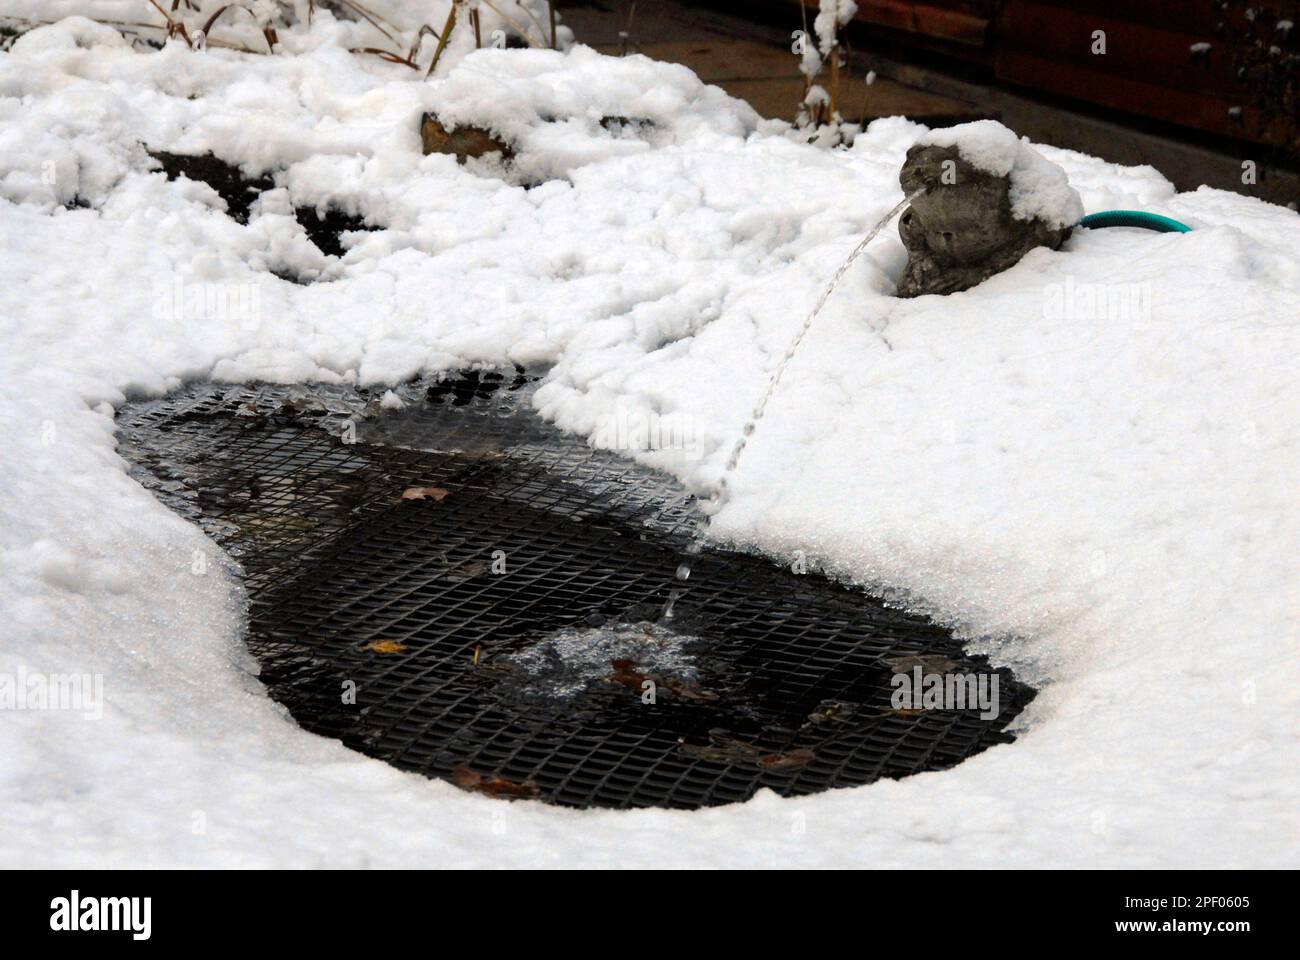 Netted garden pond with accumulated snow in winter, held in place by the net, with a stream of water keeping the pond partly open Stock Photo